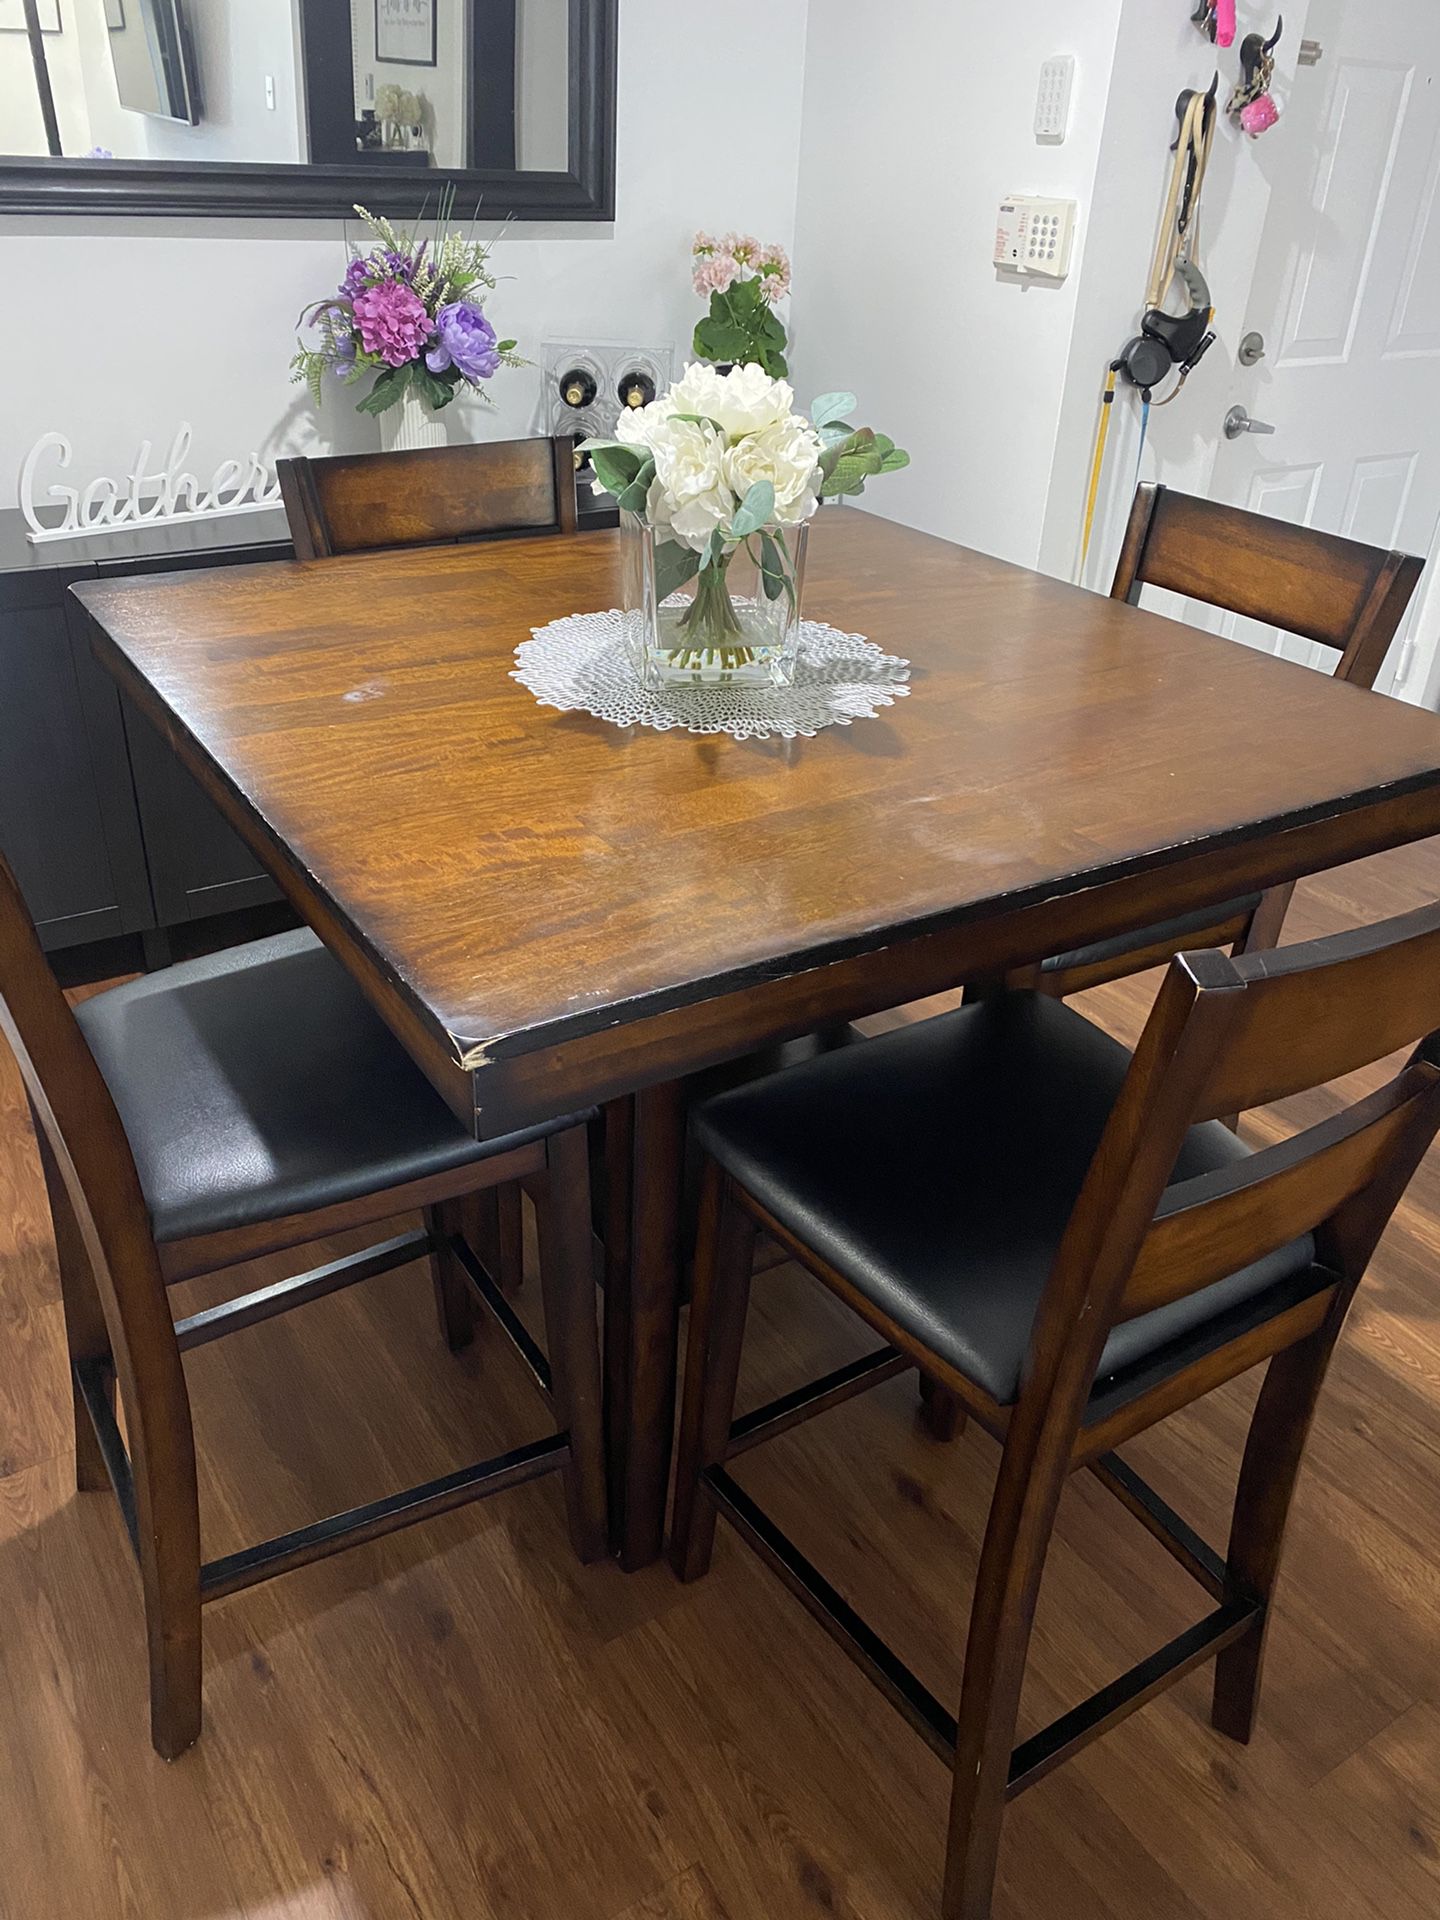 Dining Room Table and 4 Chairs